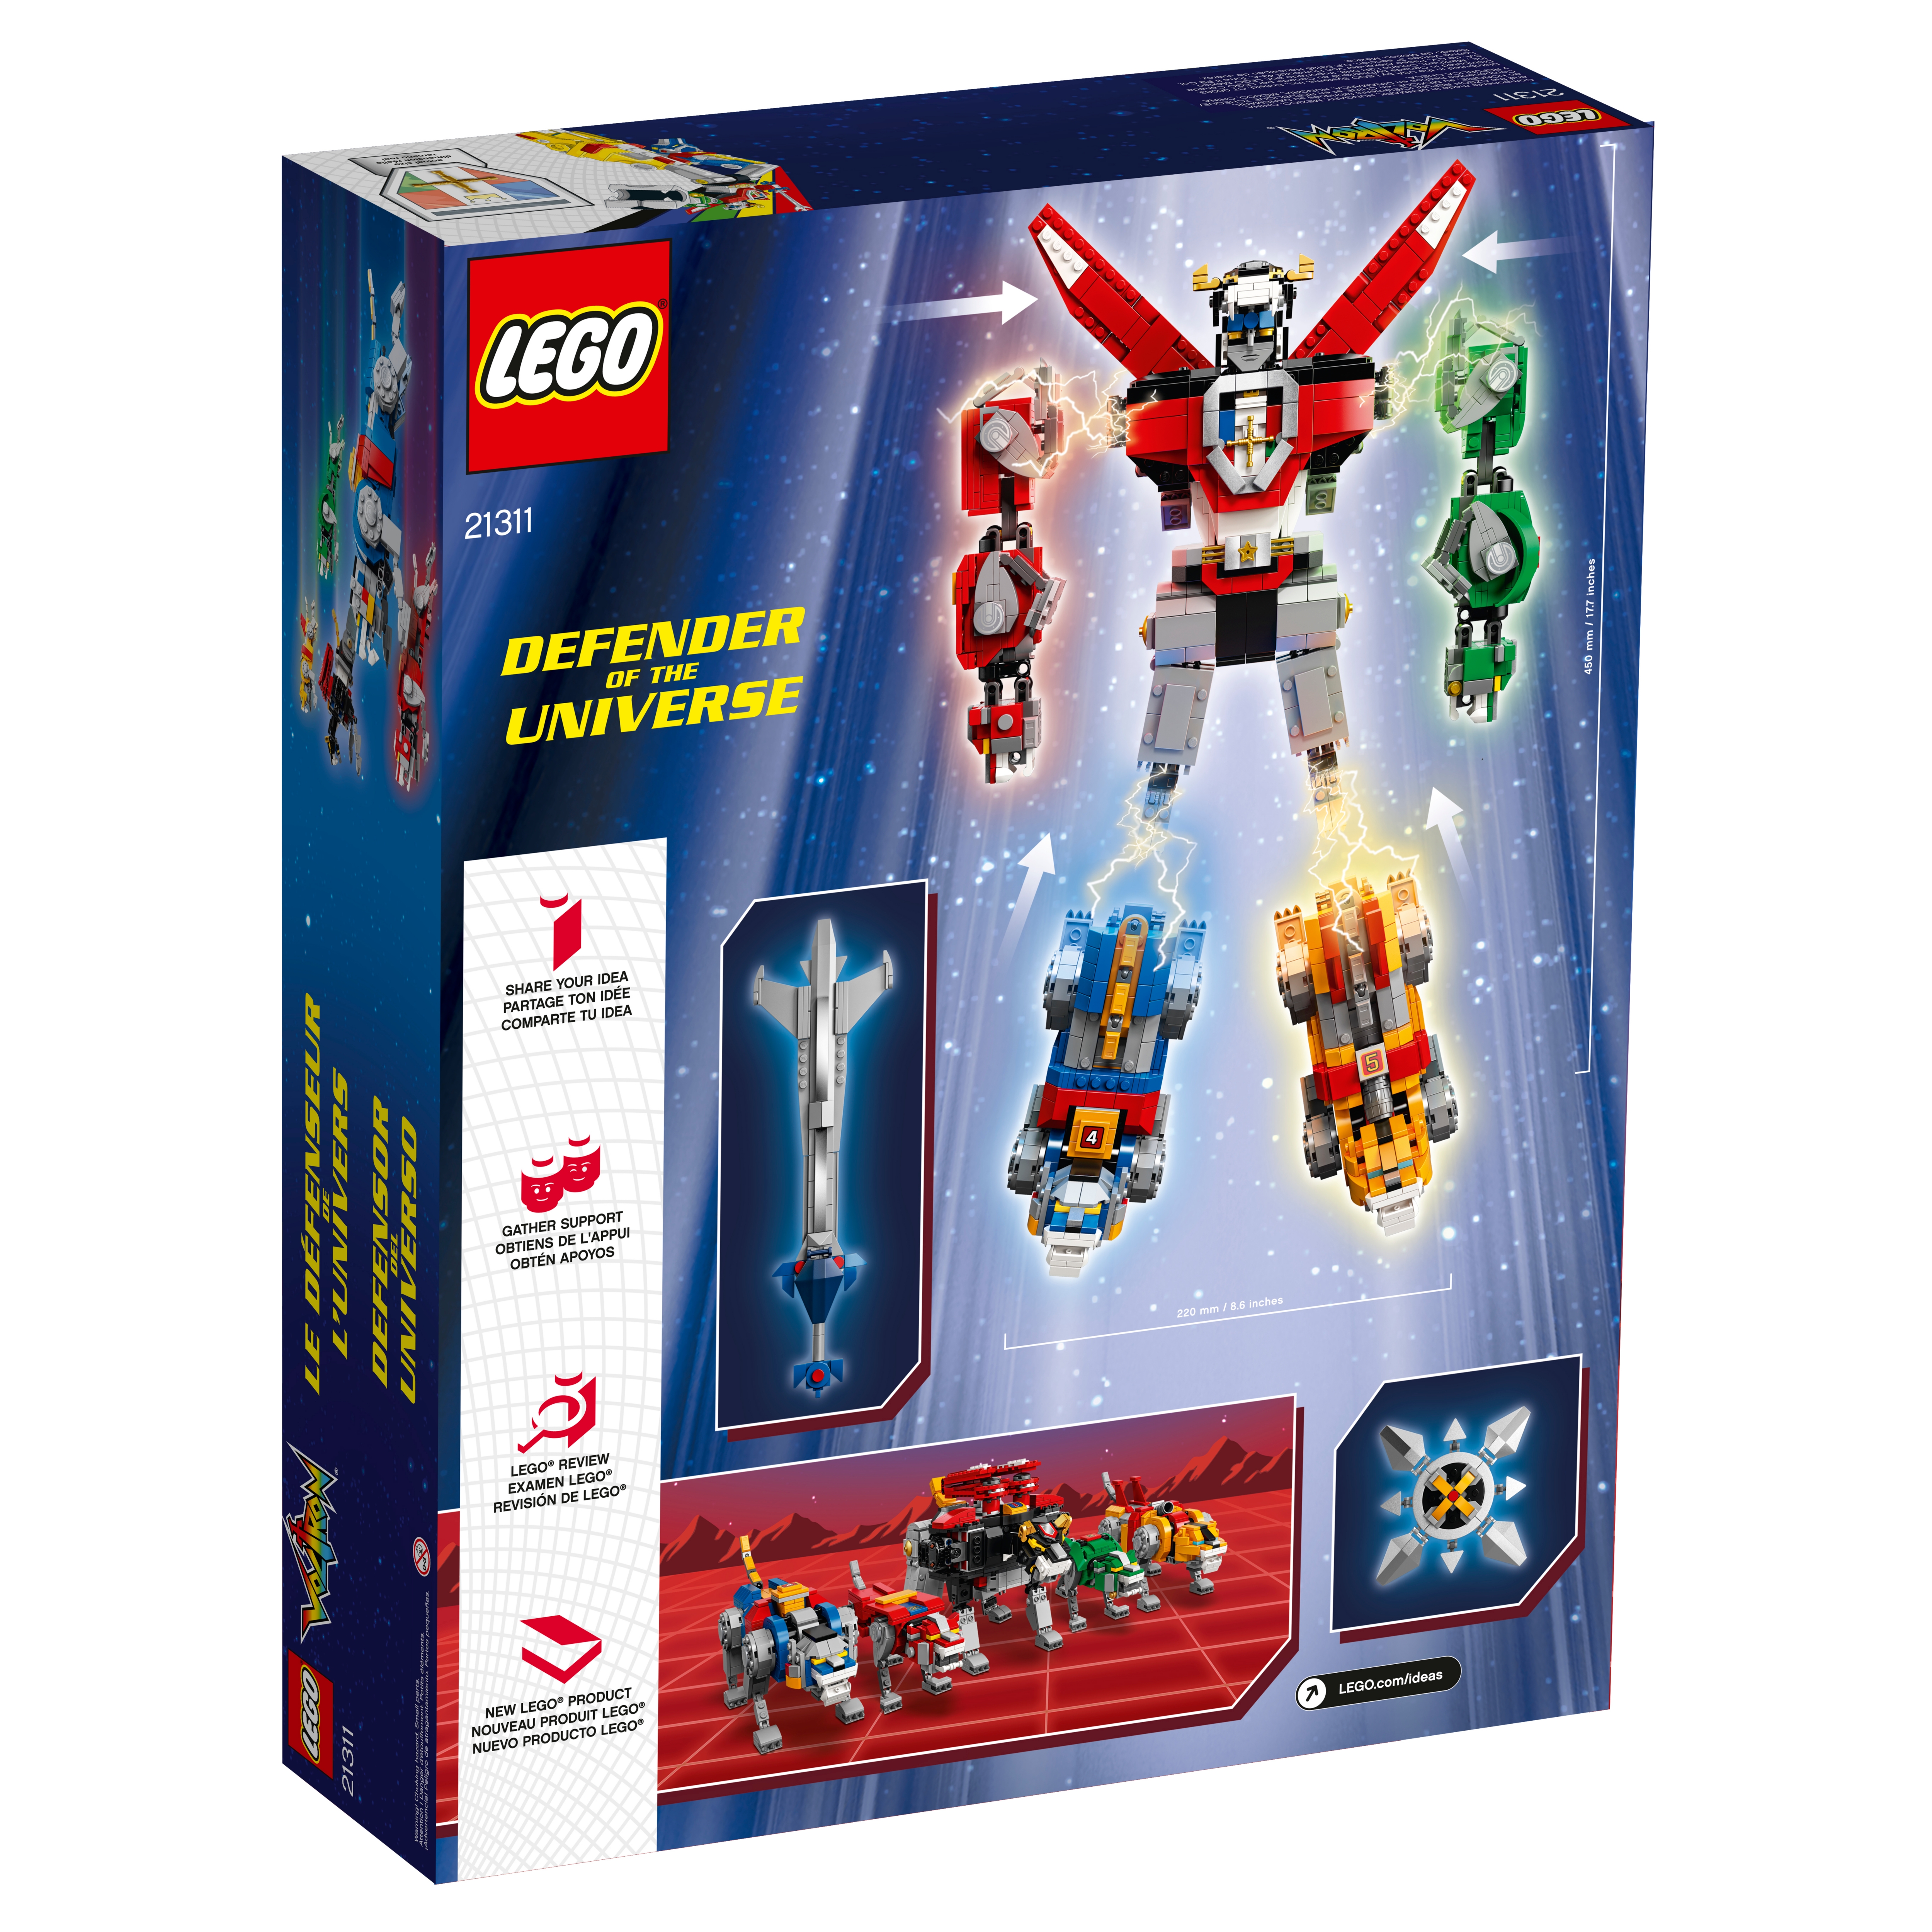 LEGO IDEAS 21311 VOLTRON DEFENDER OF THE UNIVERSE NIB SEALED IN HAND! 